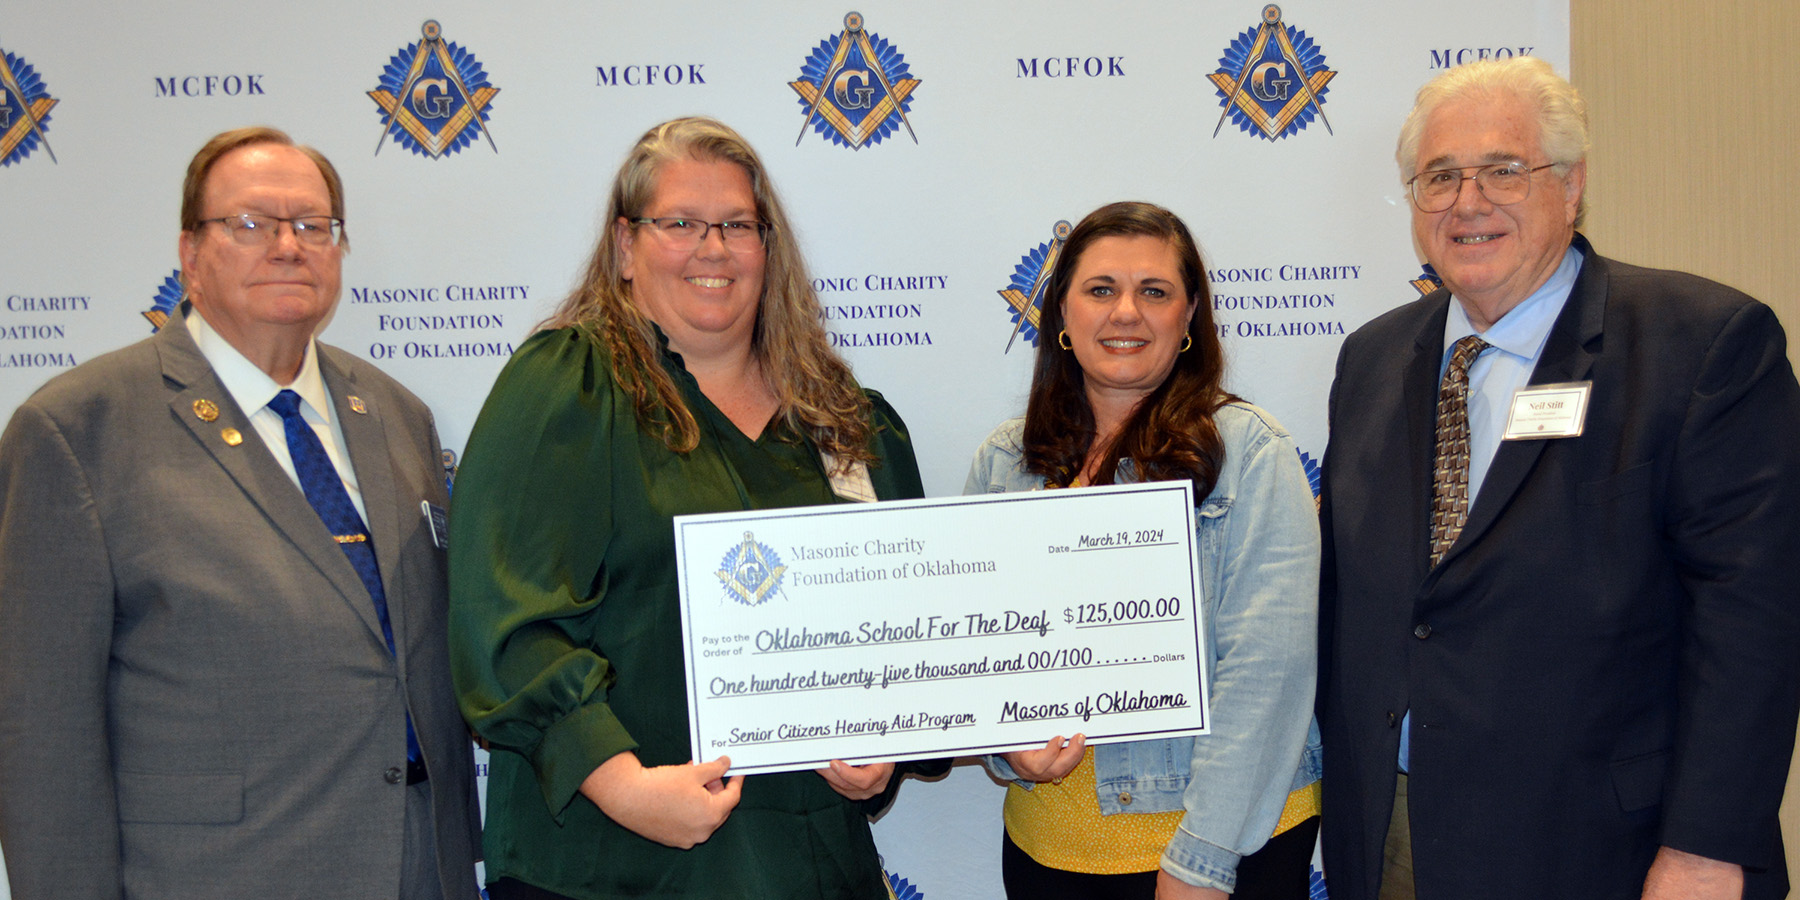 4 people hold a $125,000 check from Masonic Charity Foundation of OK